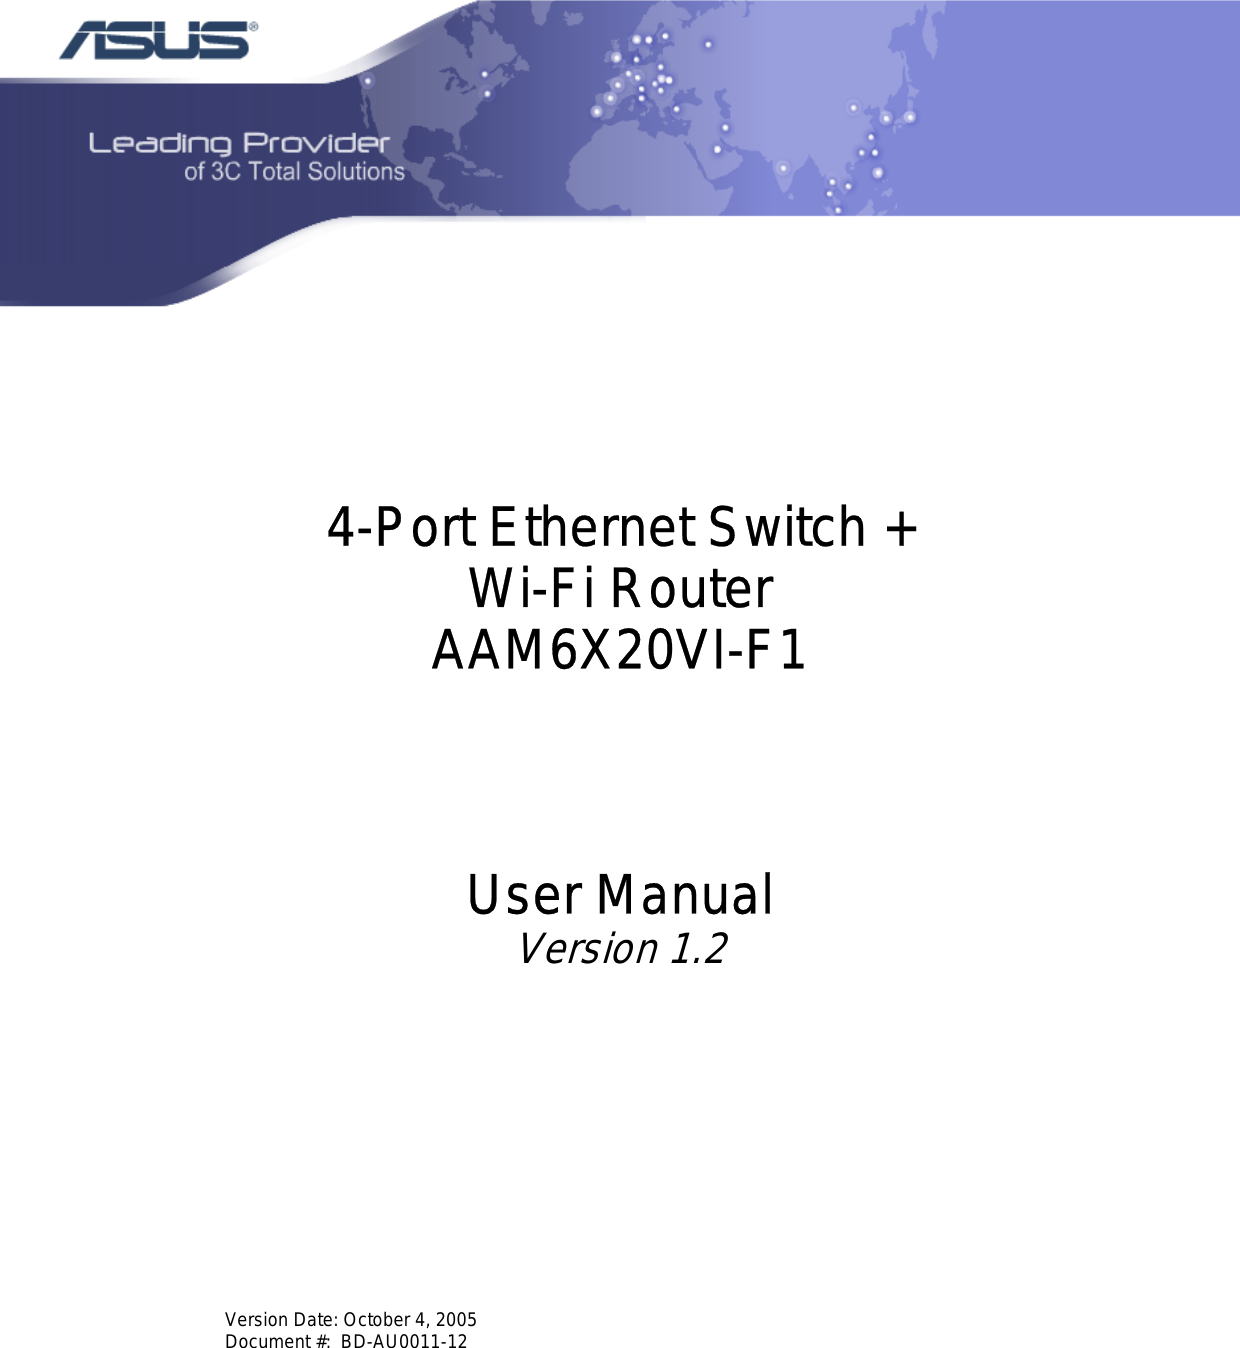    4-Port Ethernet Switch + Wi-Fi Router AAM6X20VI-F1    User Manual Version 1.2            Version Date: October 4, 2005 Document #:  BD-AU0011-12